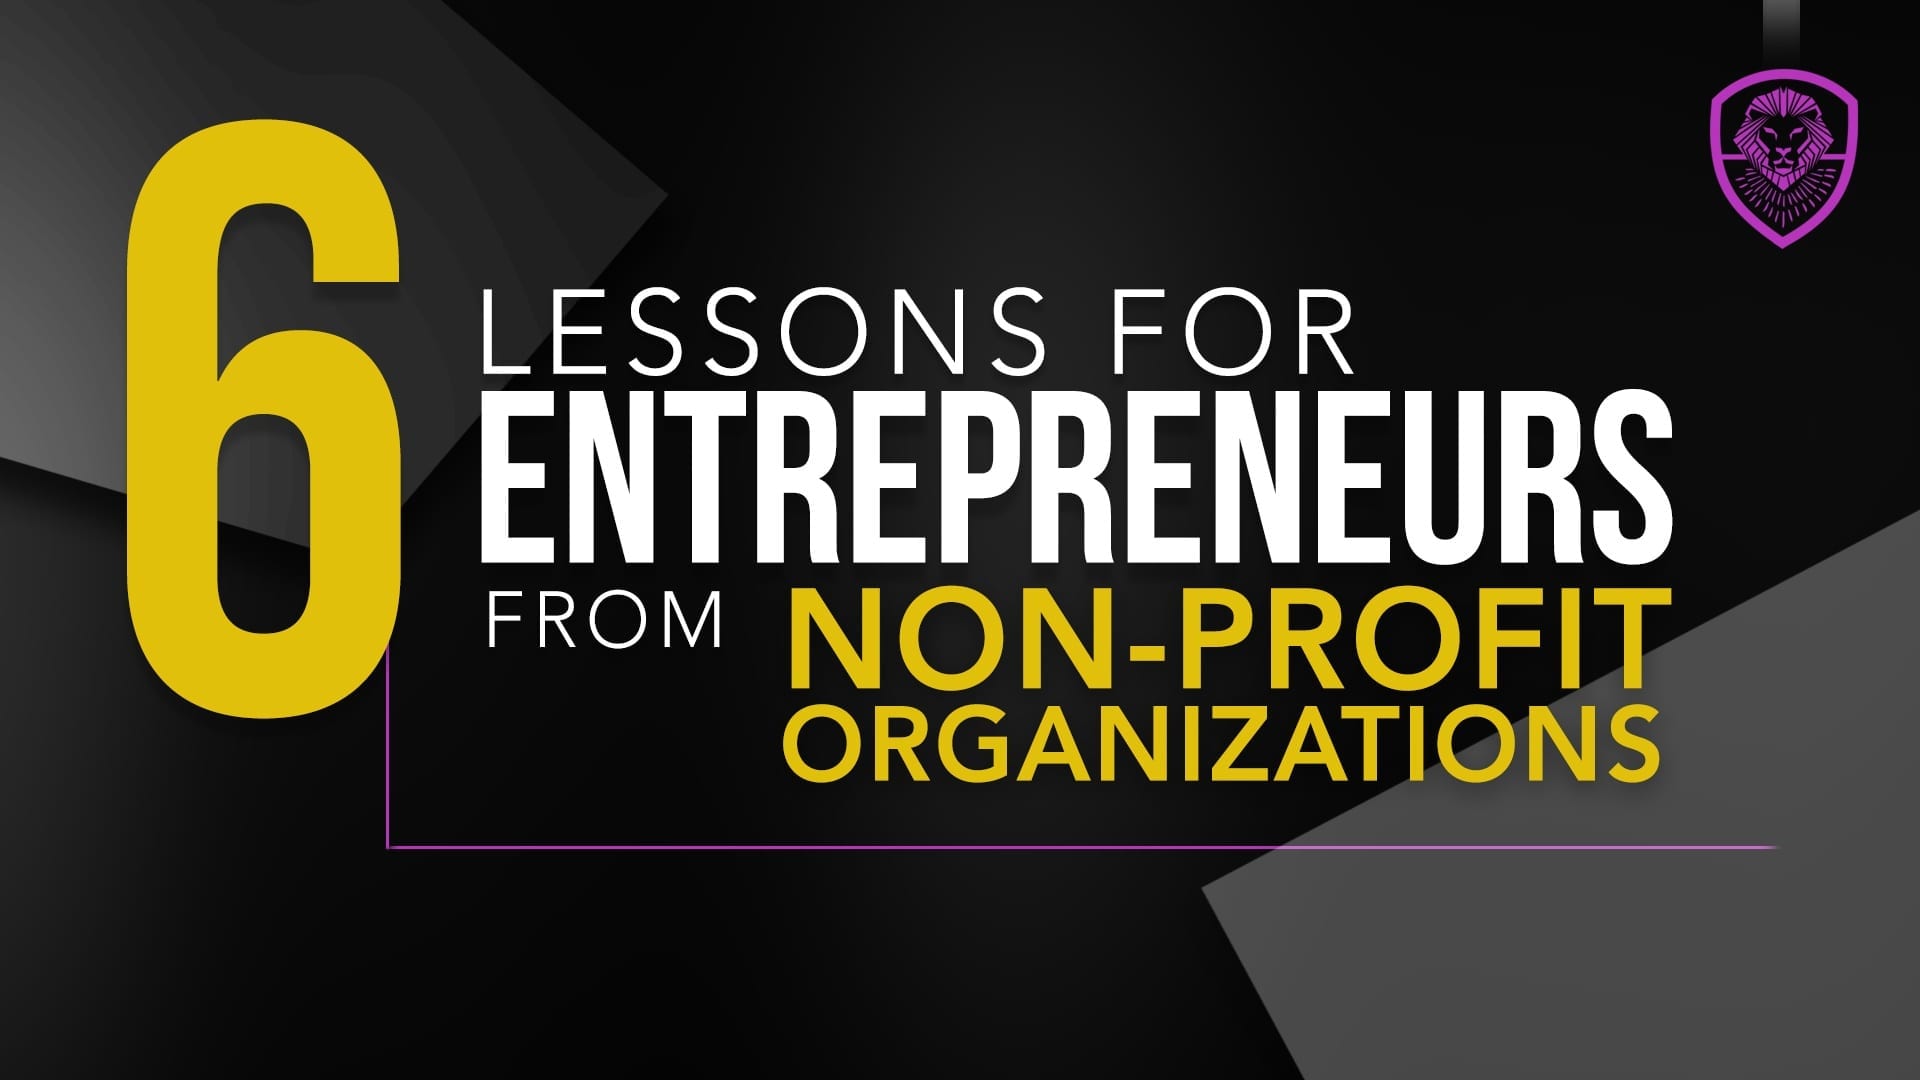 6 Lessons for Entrepreneurs from Non-Profit Organizations